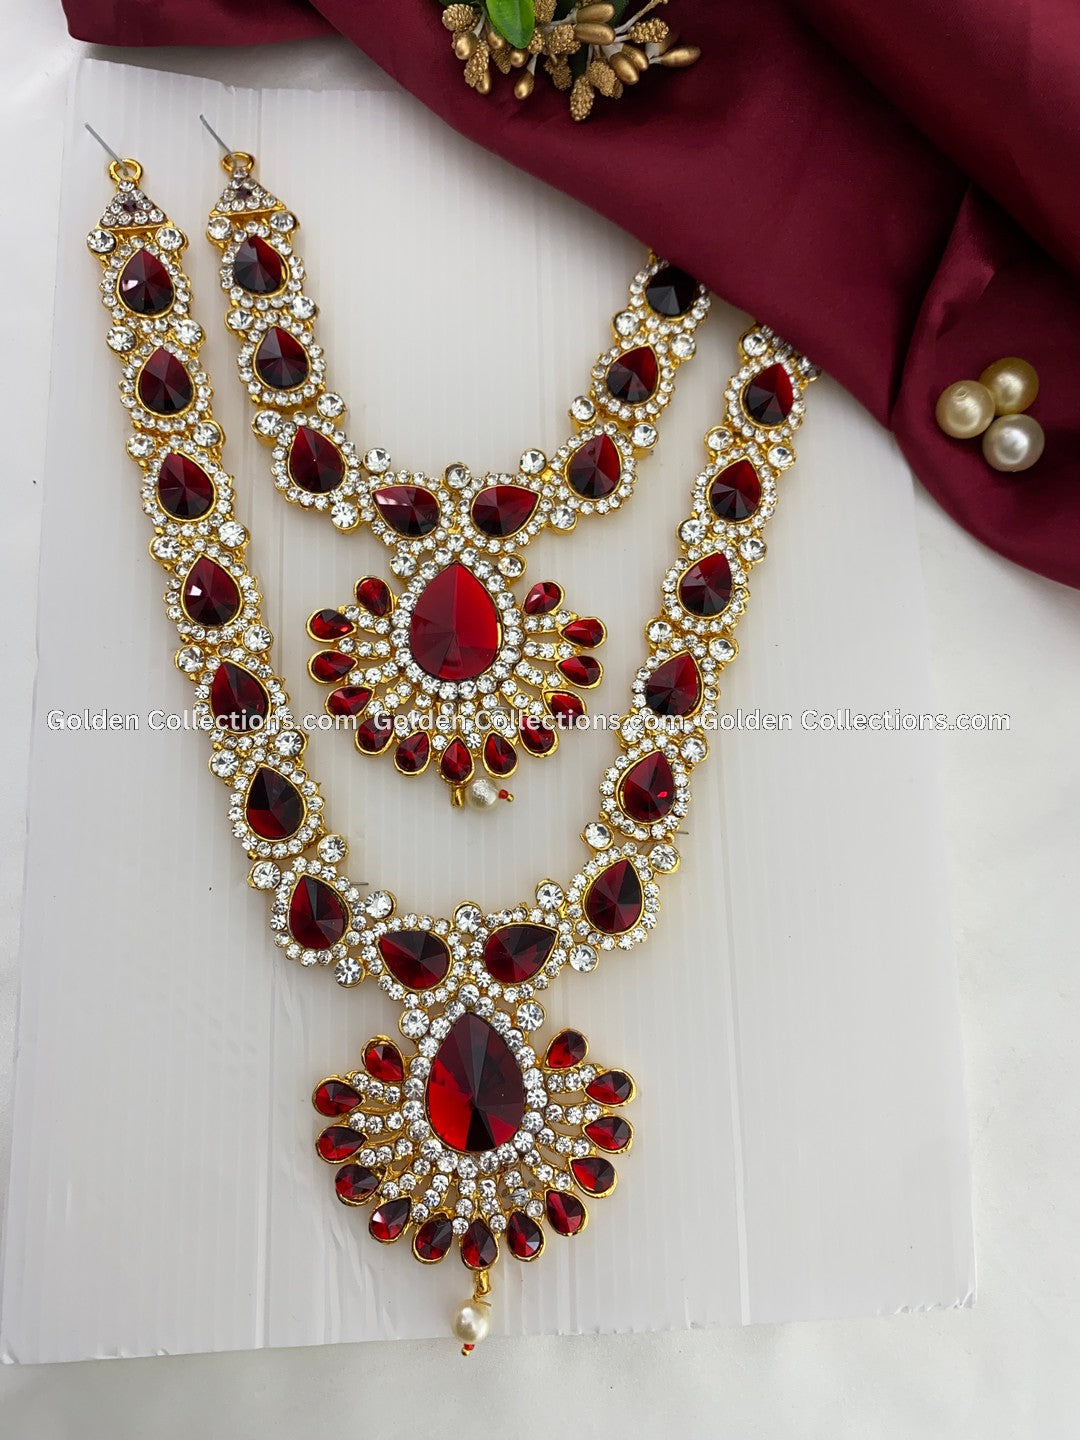 Shop now for Deity Jewellery - GoldenCollections DSN-039